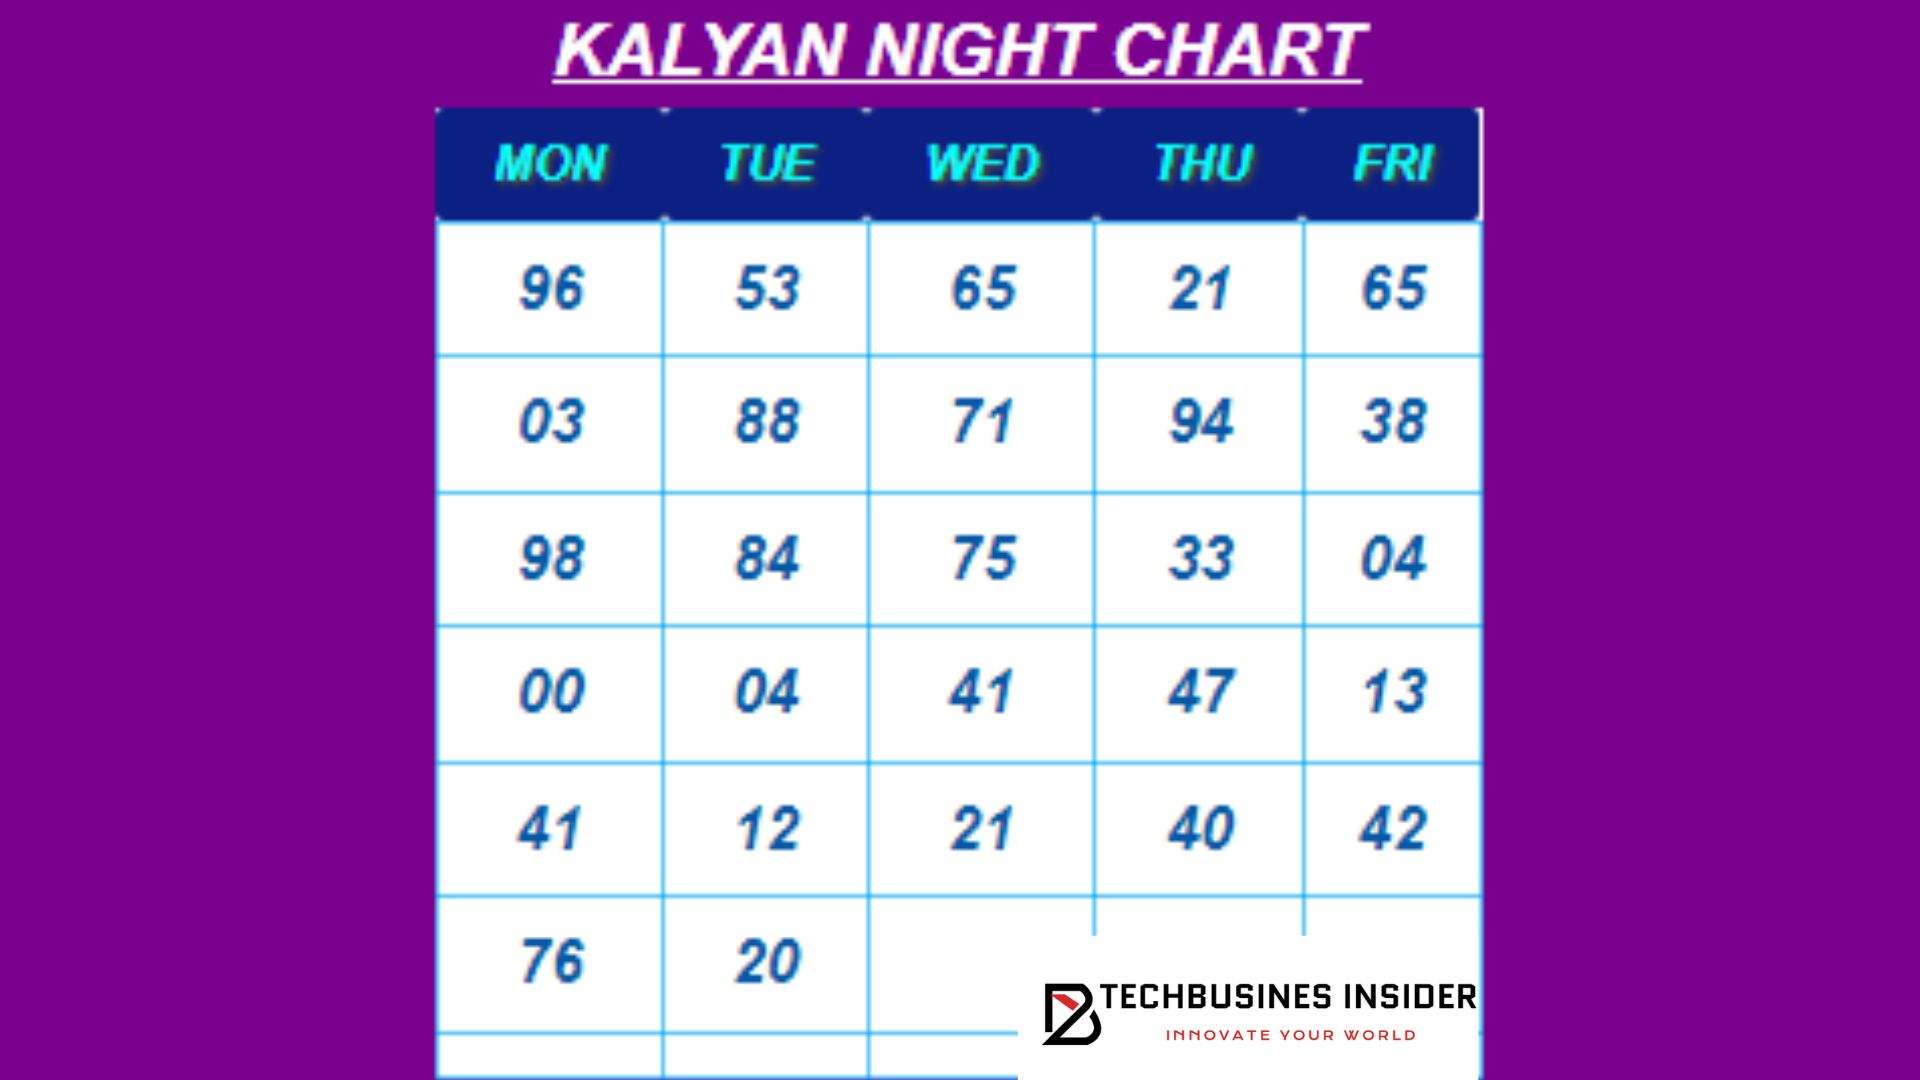 Do you know what the Kalyan night chart panel is?